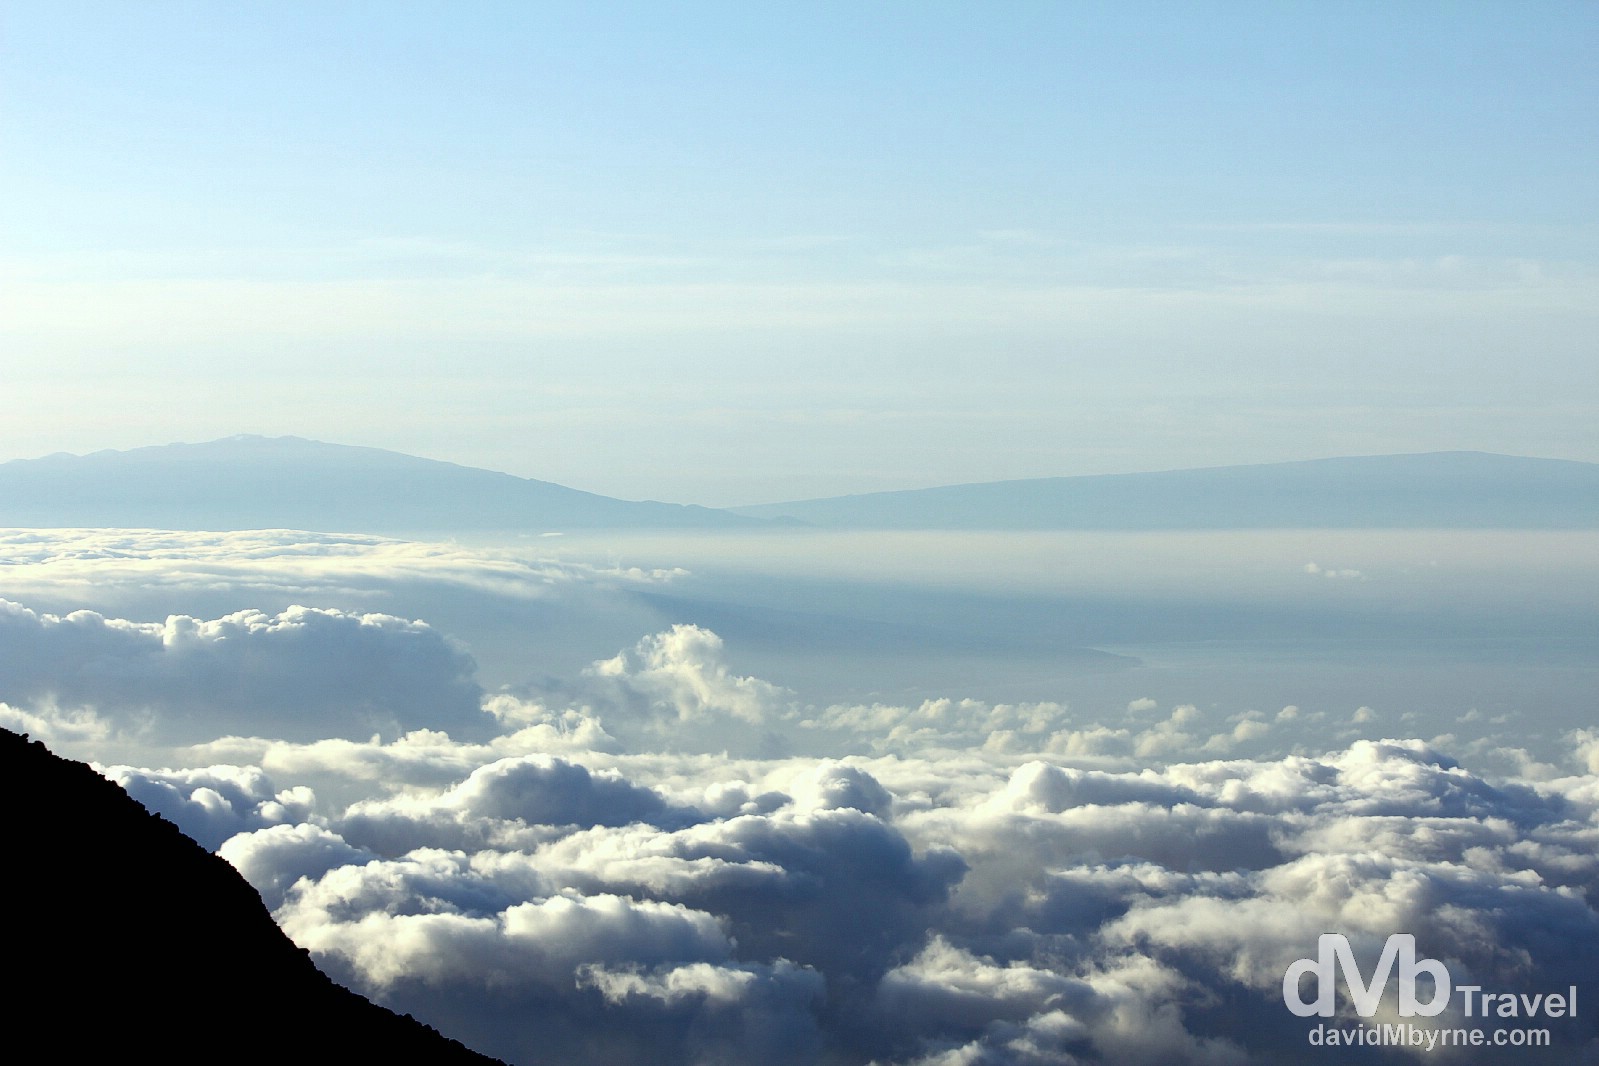 For me the sunrise from Haleakala was secondary to the amazing views, not only of the clouds hovering above Maui (& far below me) but also of the distant peaks of Mauna Kea (one the left) & Mauna Loa (on the right) on the Big Island, 100m/160km & 80m/128km &amp away respectively - it was especially gratifying peering across at Mauna Kea, having stood on its snowy, 13,796ft/4,205m summit a few days earlier. Haleakala National Park, Maui, Hawaii. March 6th 2013. 